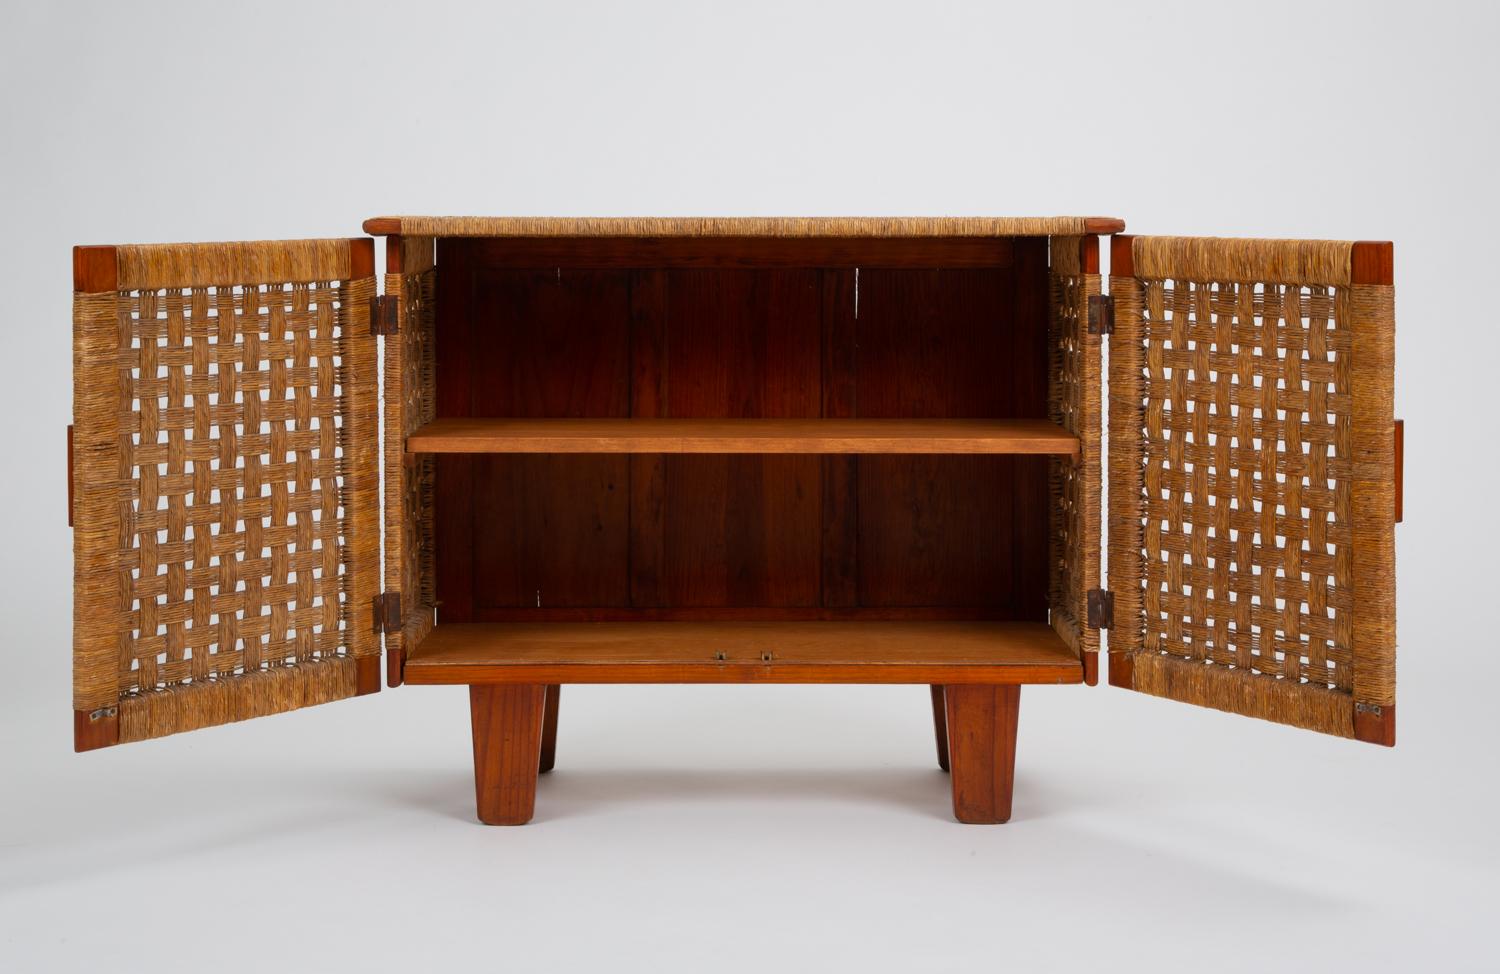 Mexican Compact Woven Rattan Credenza by Michael van Beuren for Domus Mexico